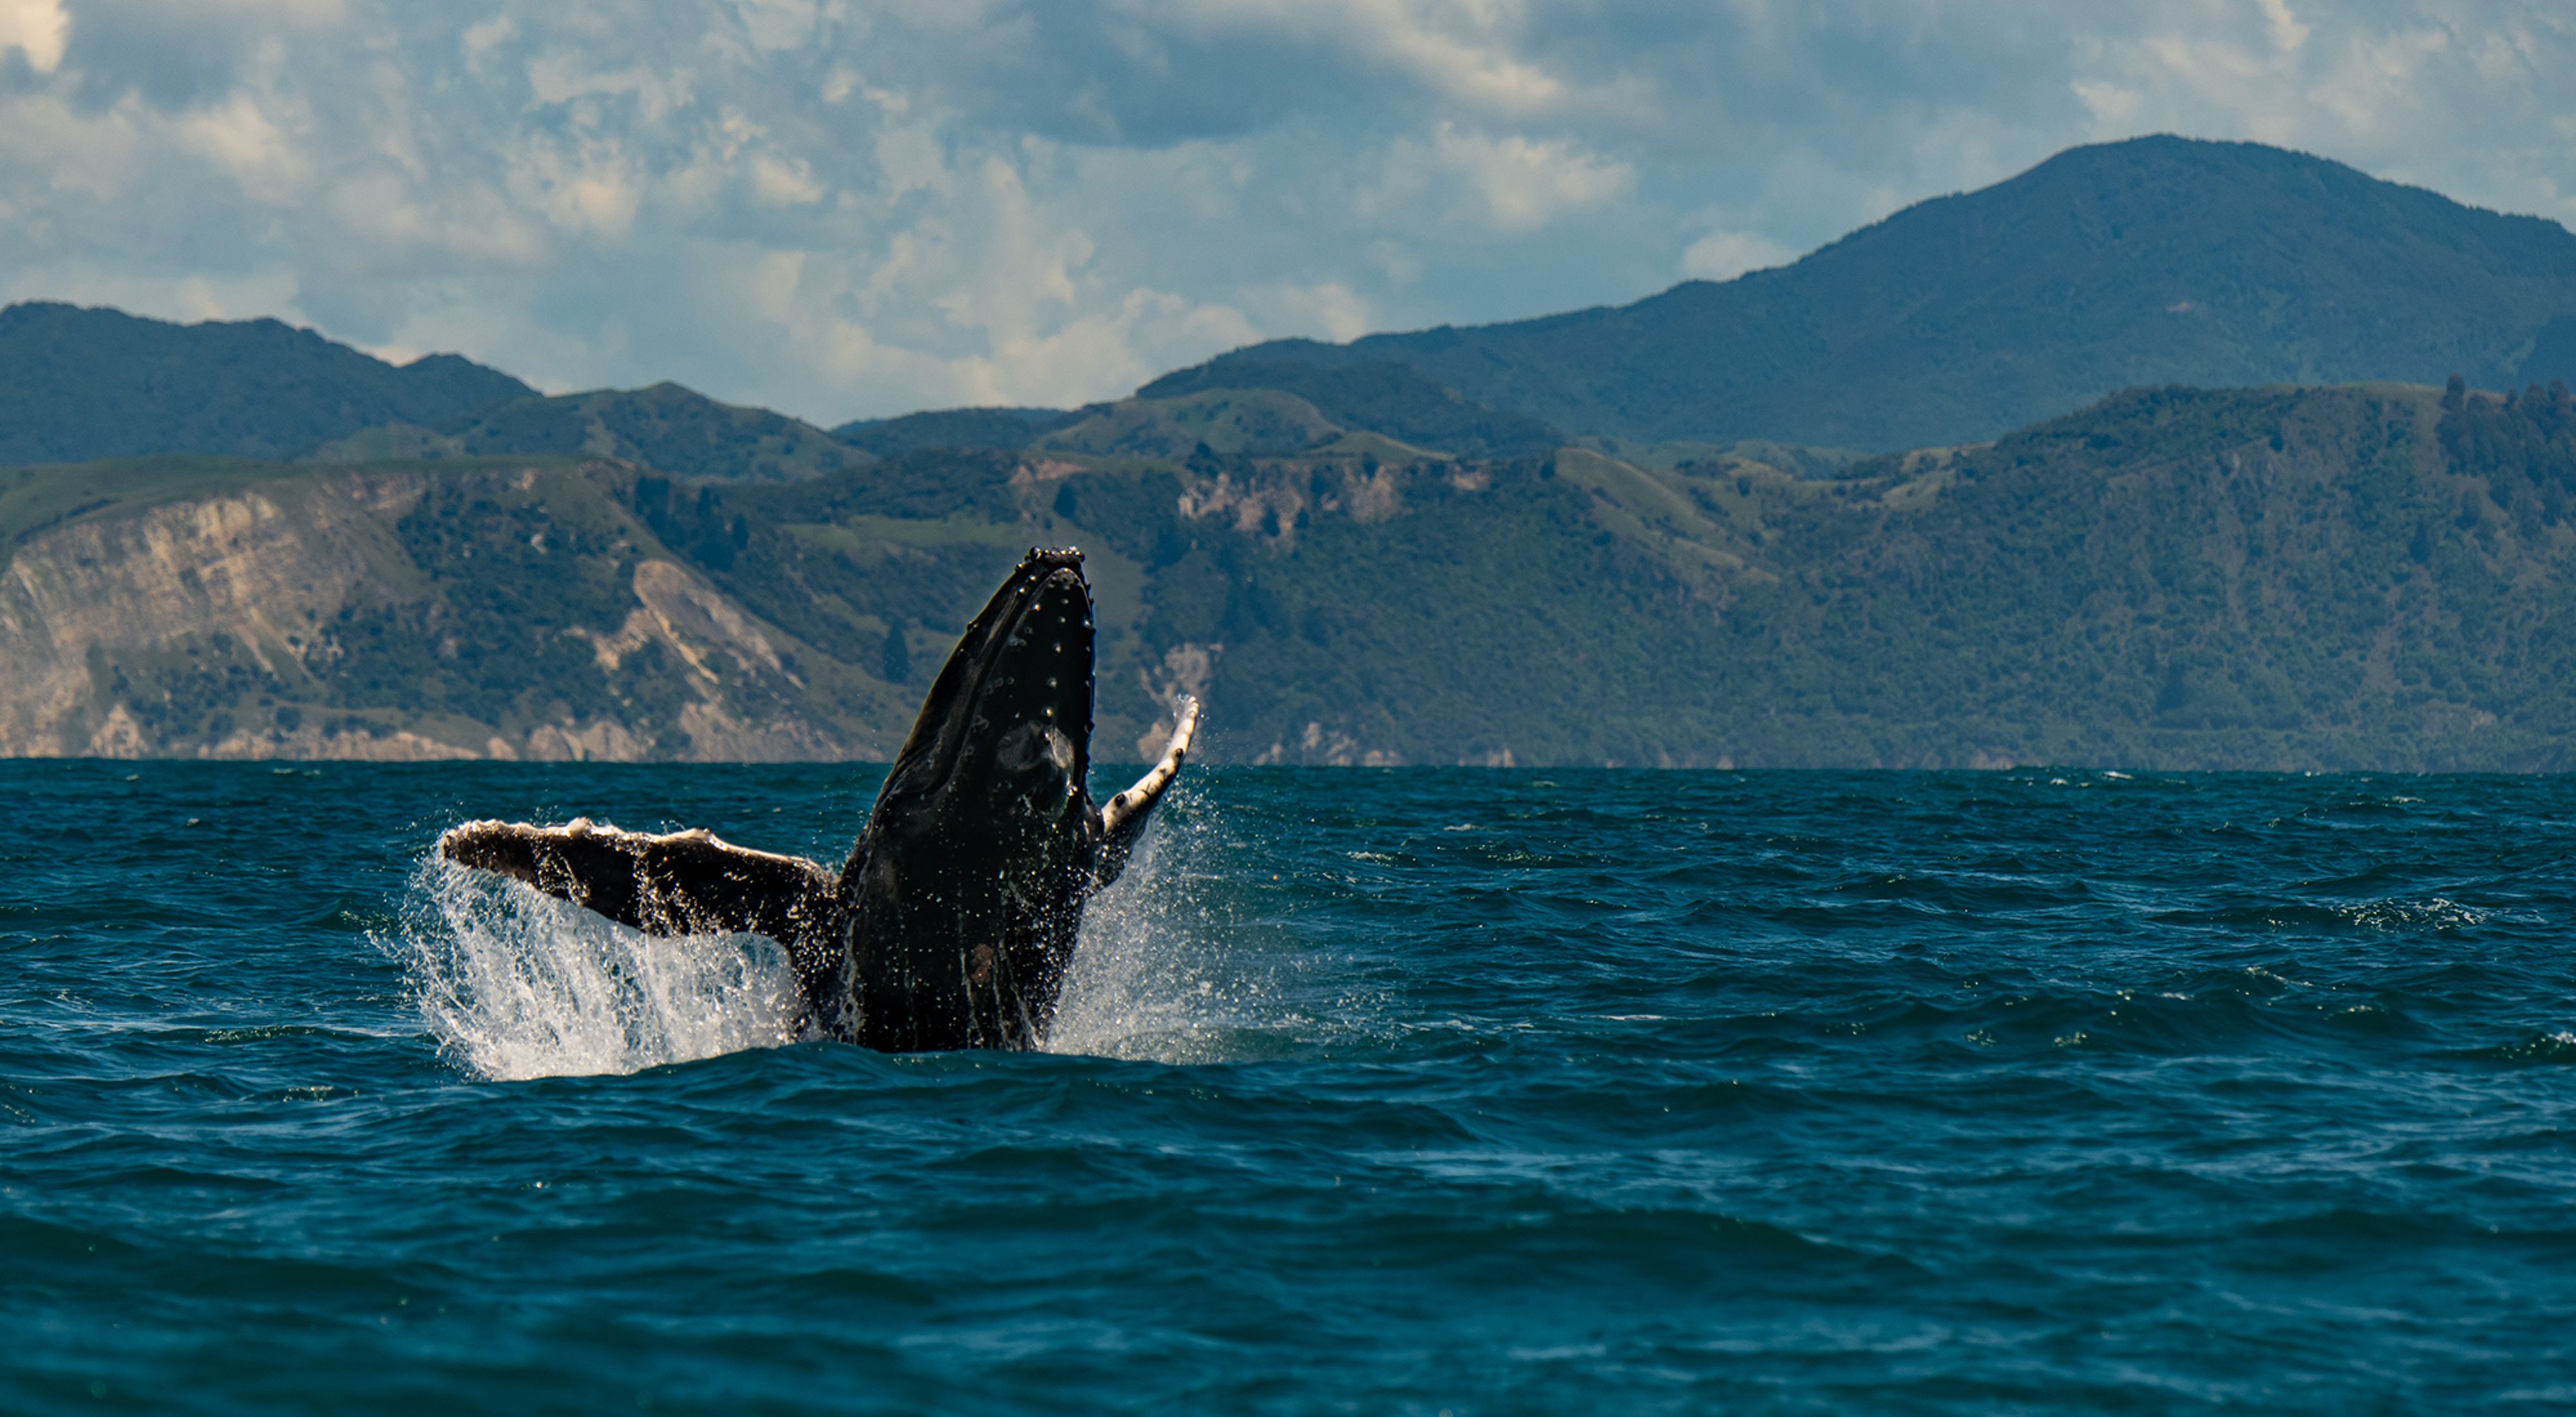 A humpback whale breaching off the coast of Kaikoura, New Zealand.